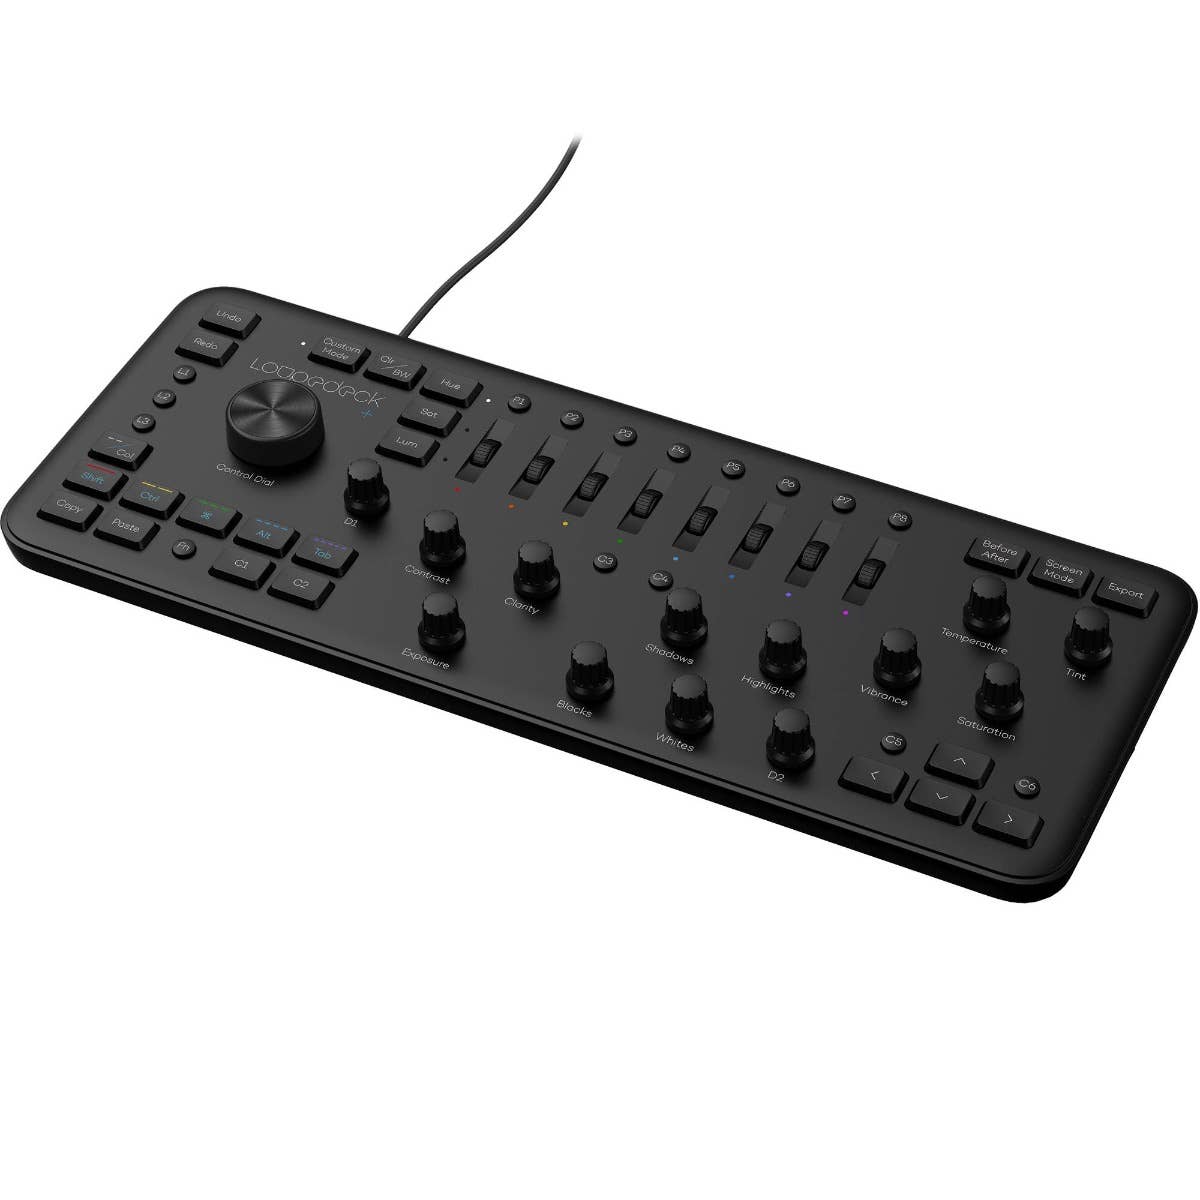 Loupedeck+ The Photo and Video Editing Console - Store 974 | ستور ٩٧٤